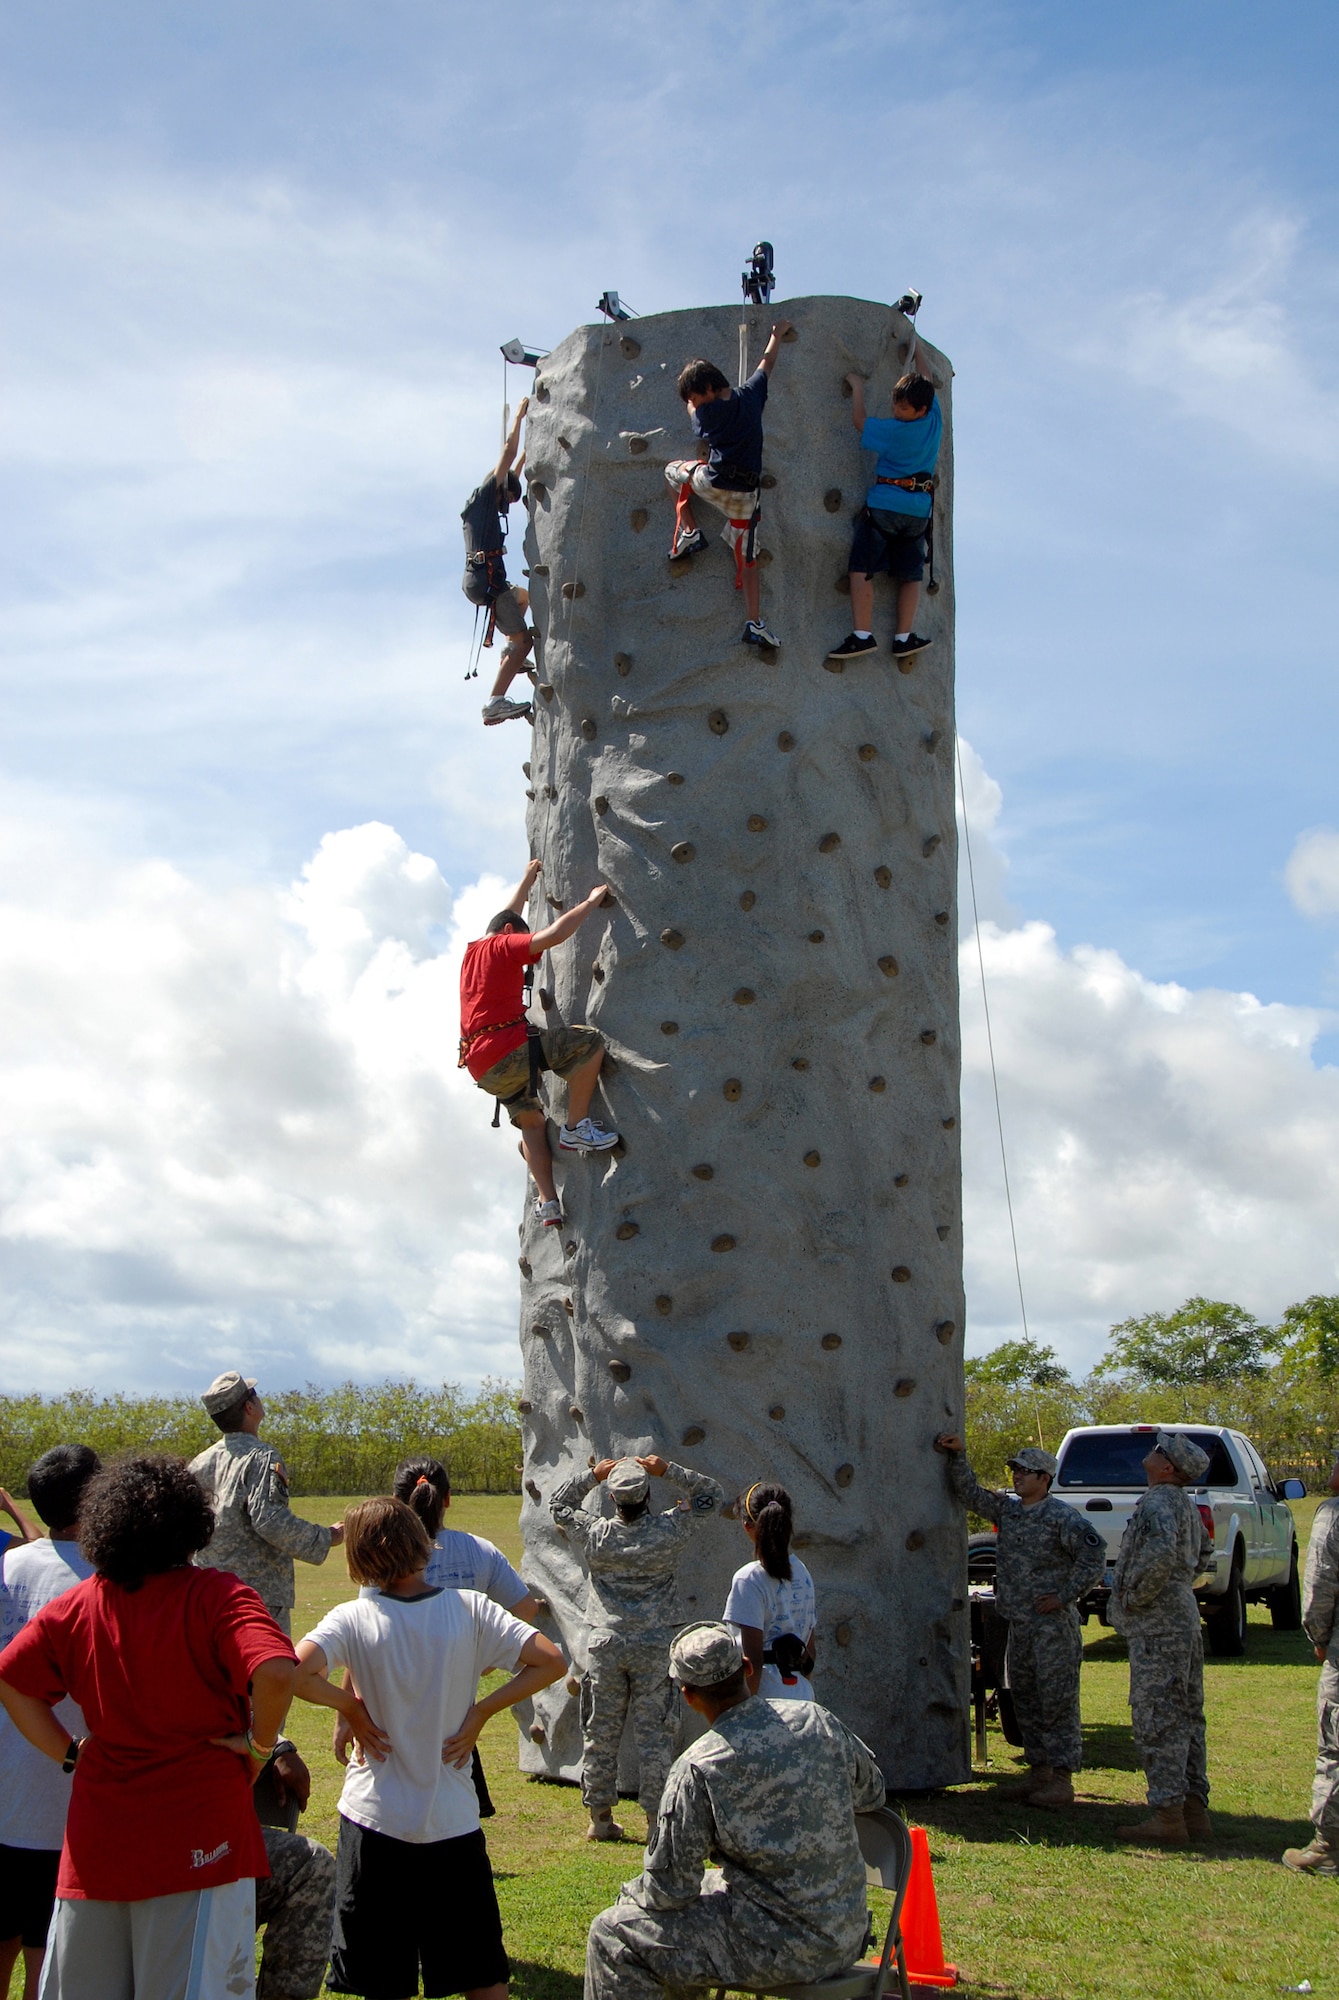 Members of the Air and Army National Guard Counterdrug program provide the rock wall climbing activity for the children during a Drug Demand Reduction presentation at the University of Guam, June 29. (U.S. Air Force photo/Tech. Sgt. Betty J. Squatrito-Martin)